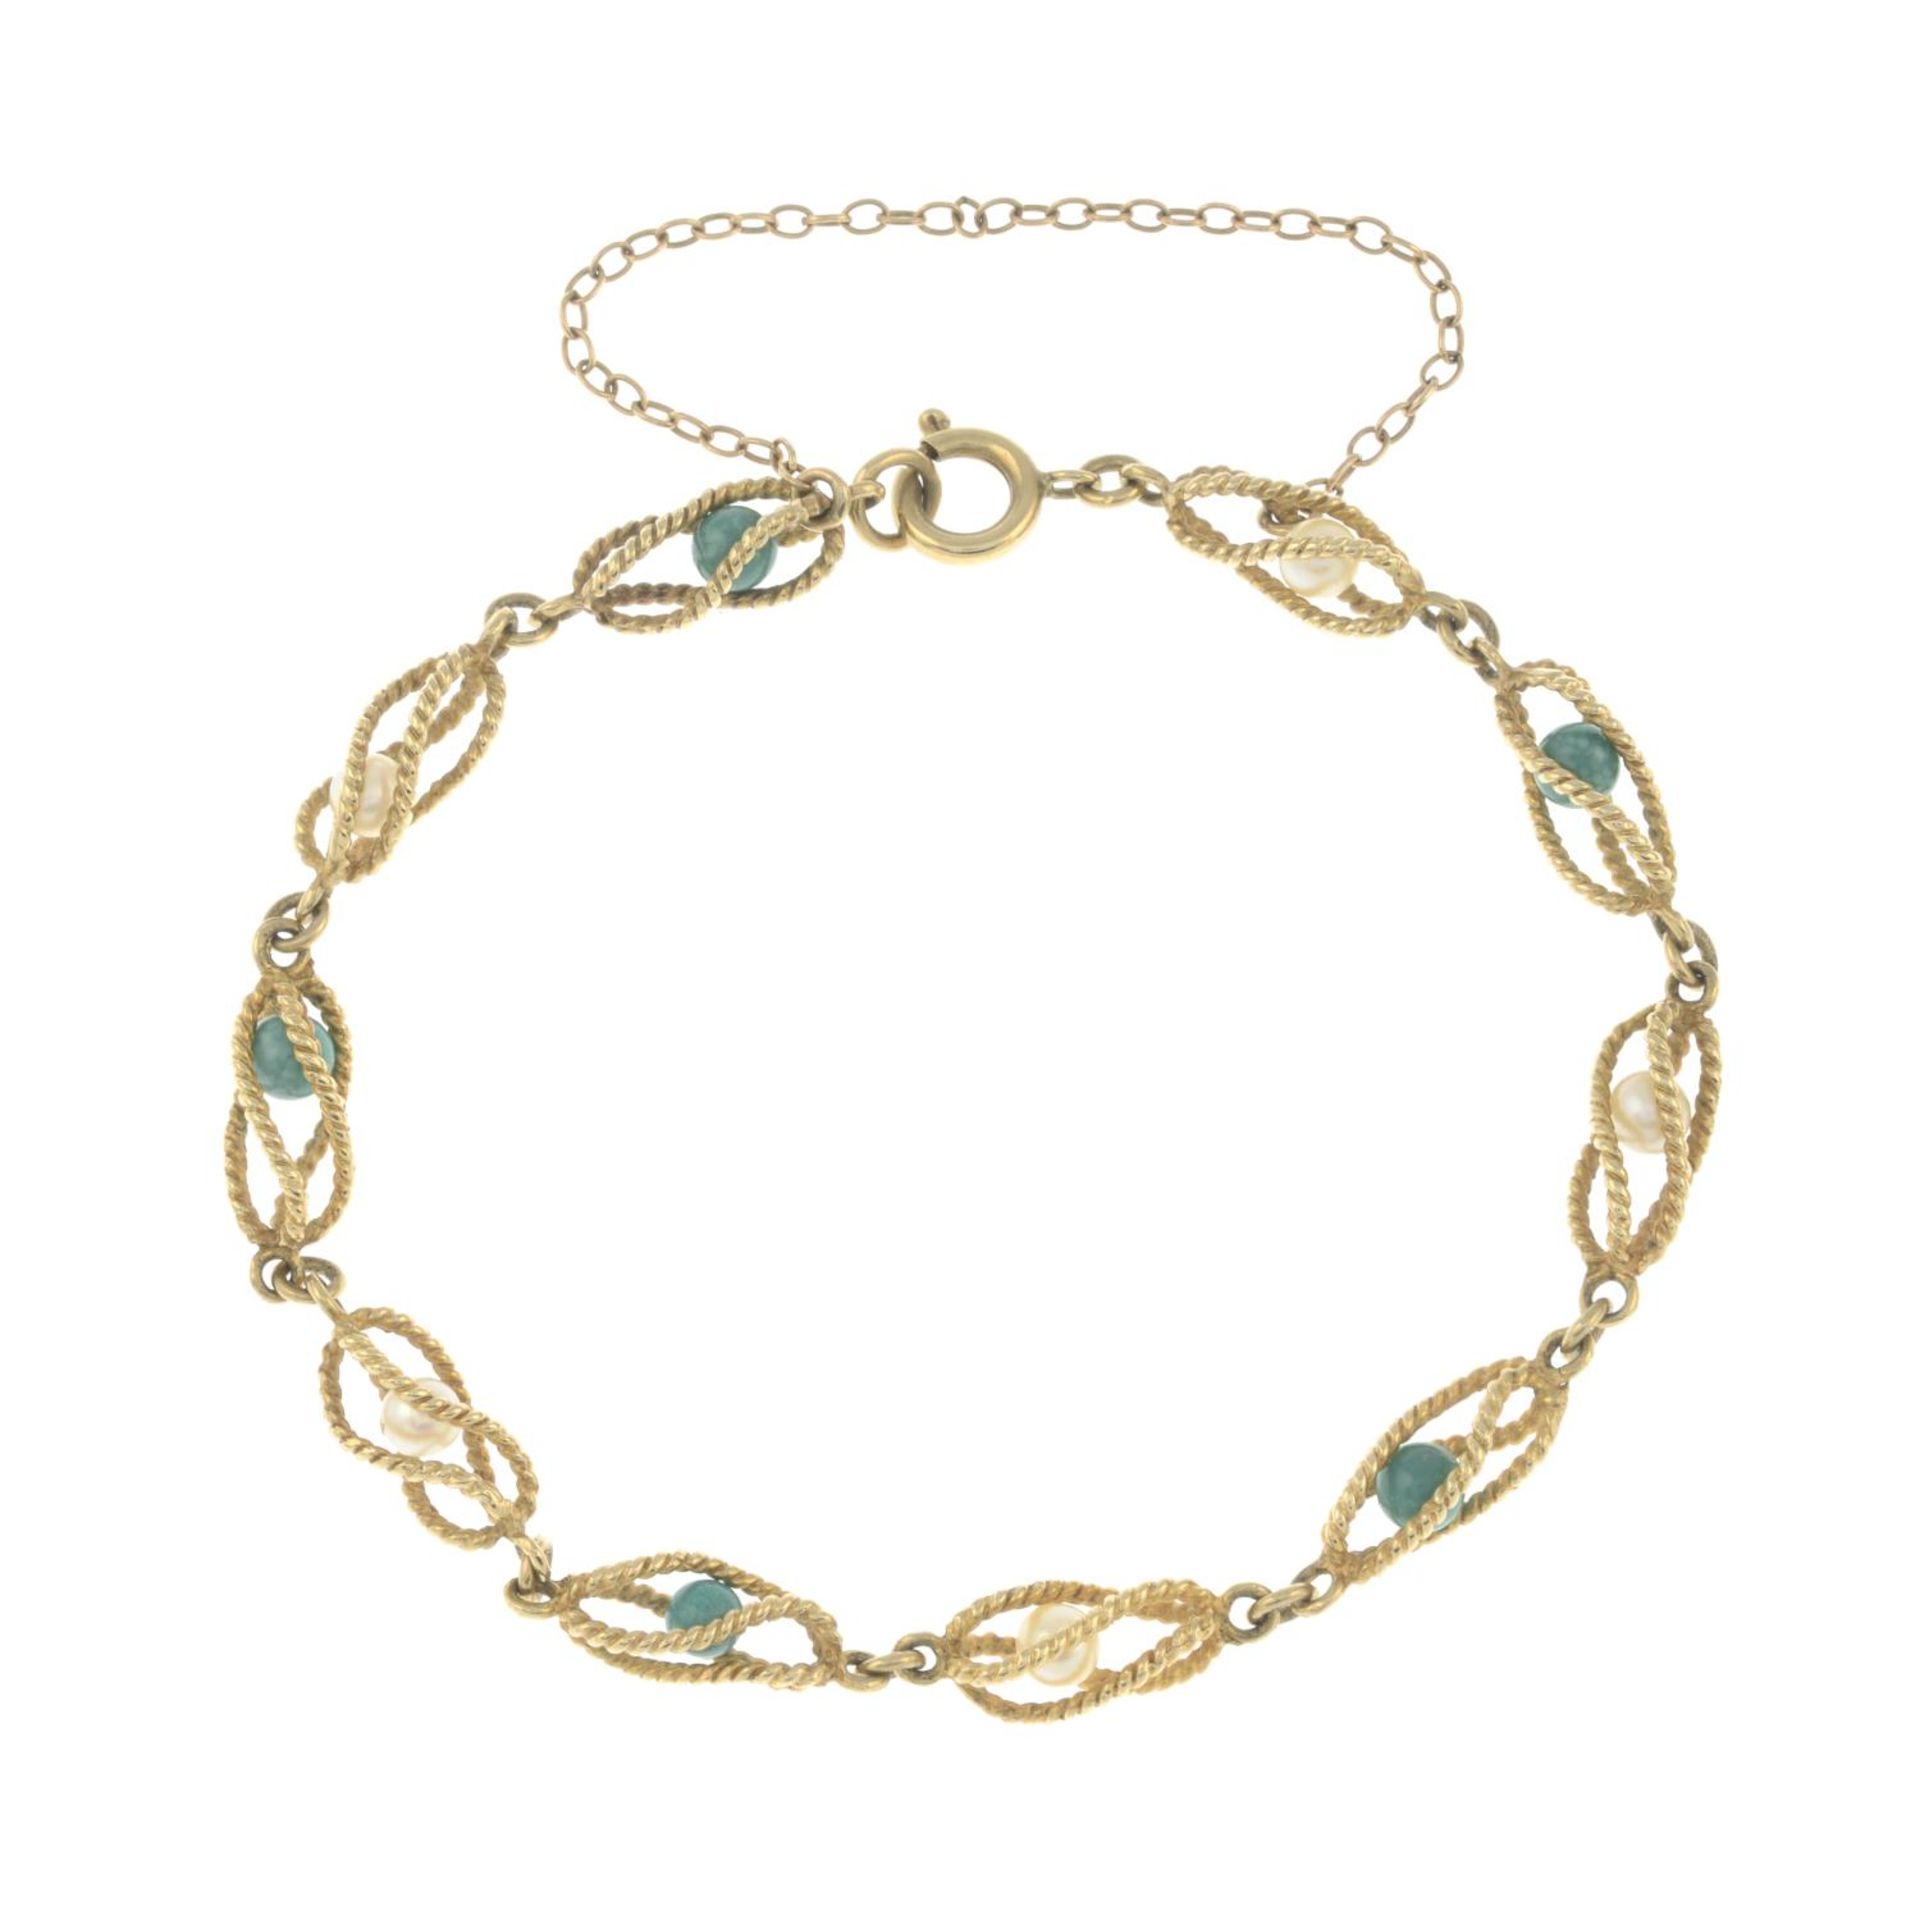 A 9ct gold cultured pearl and turquoise bracelet.Hallmarks for 9ct gold, partially indistinct. - Image 2 of 2